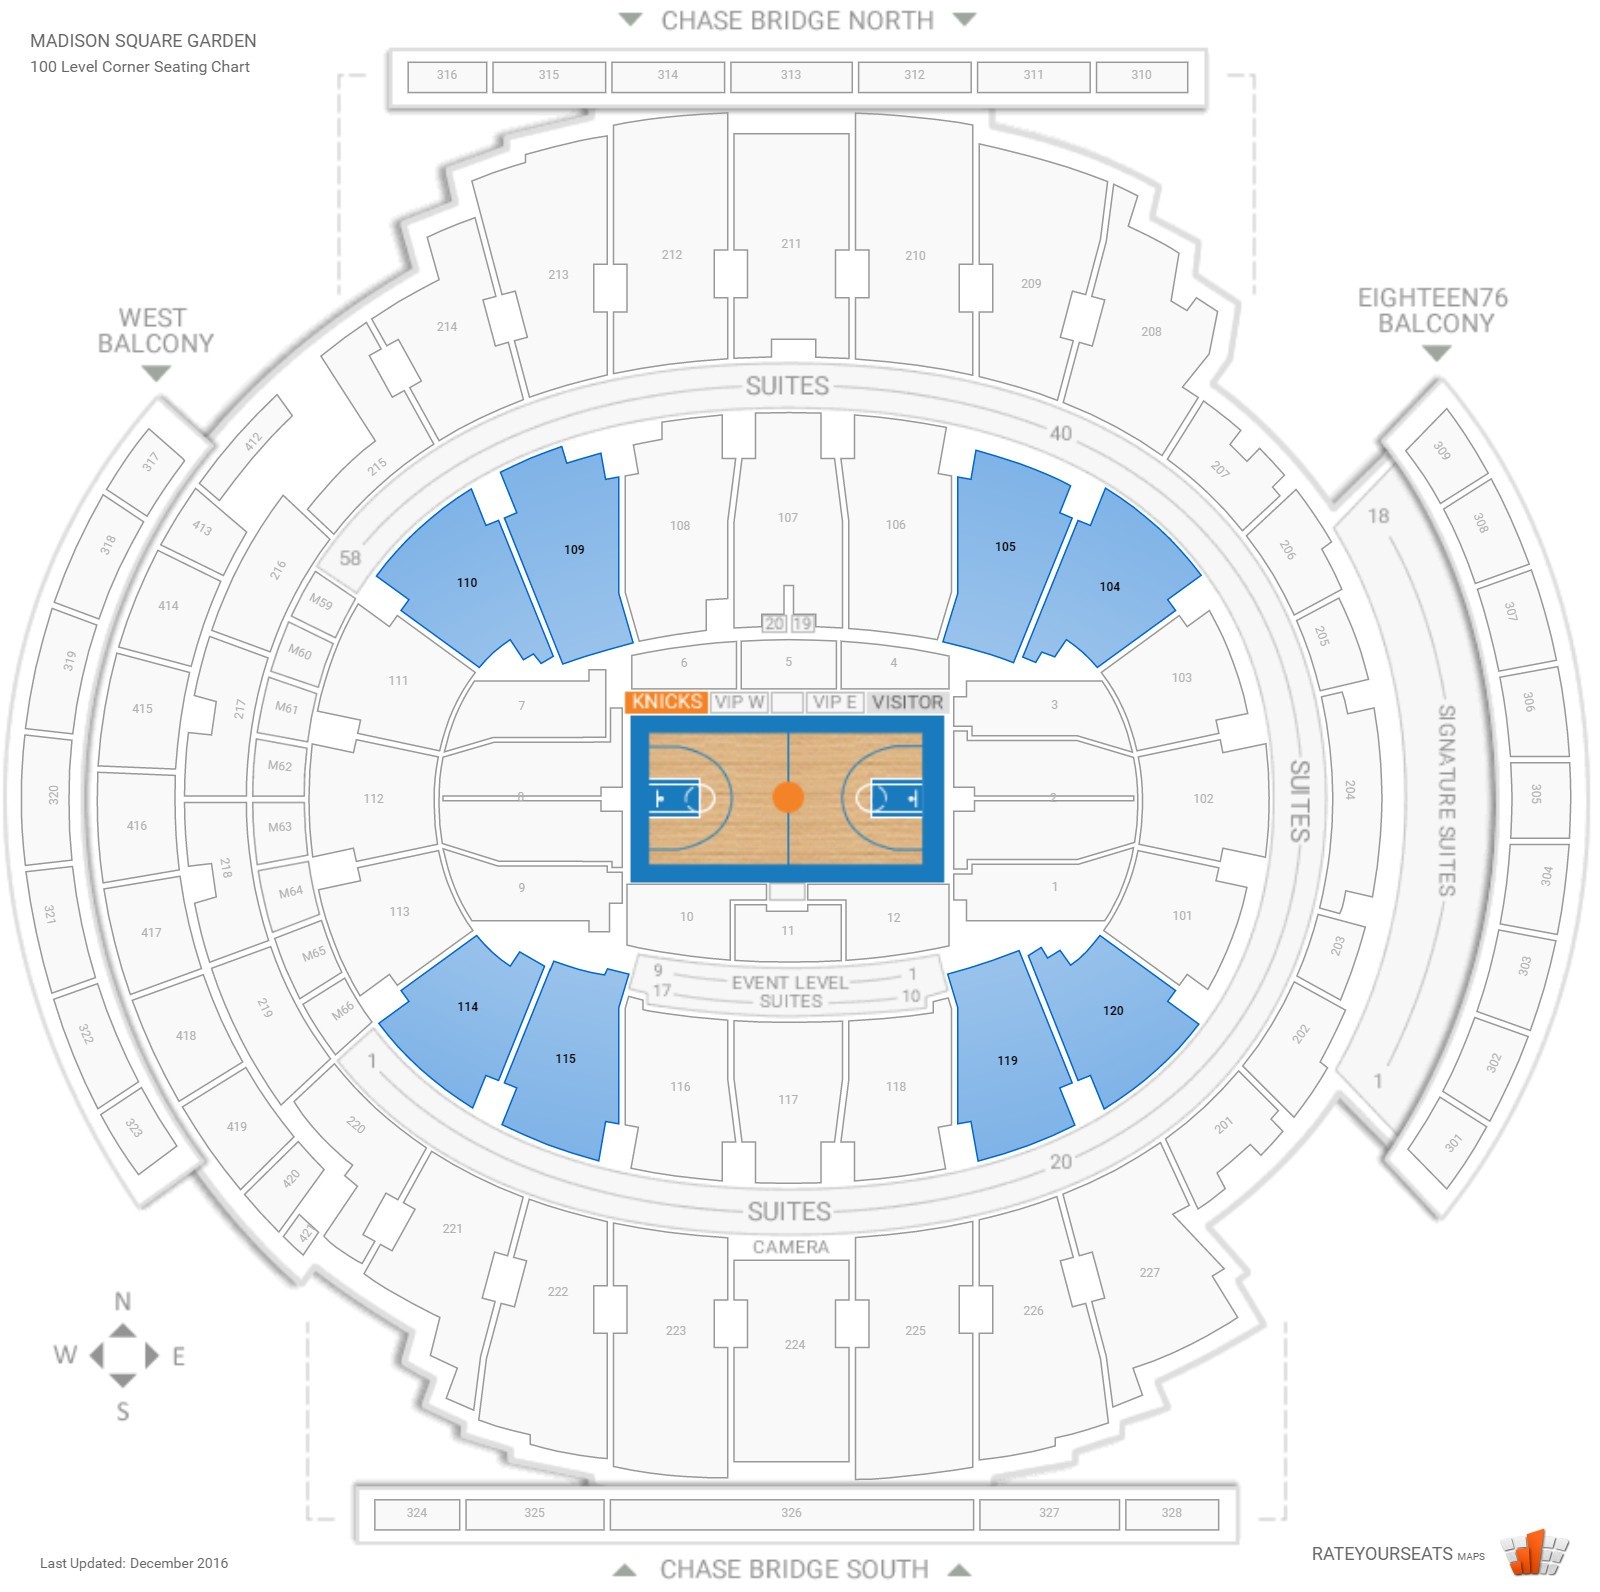 Awesome Madison Square Garden Seating Chart Basketball - Seating Chart